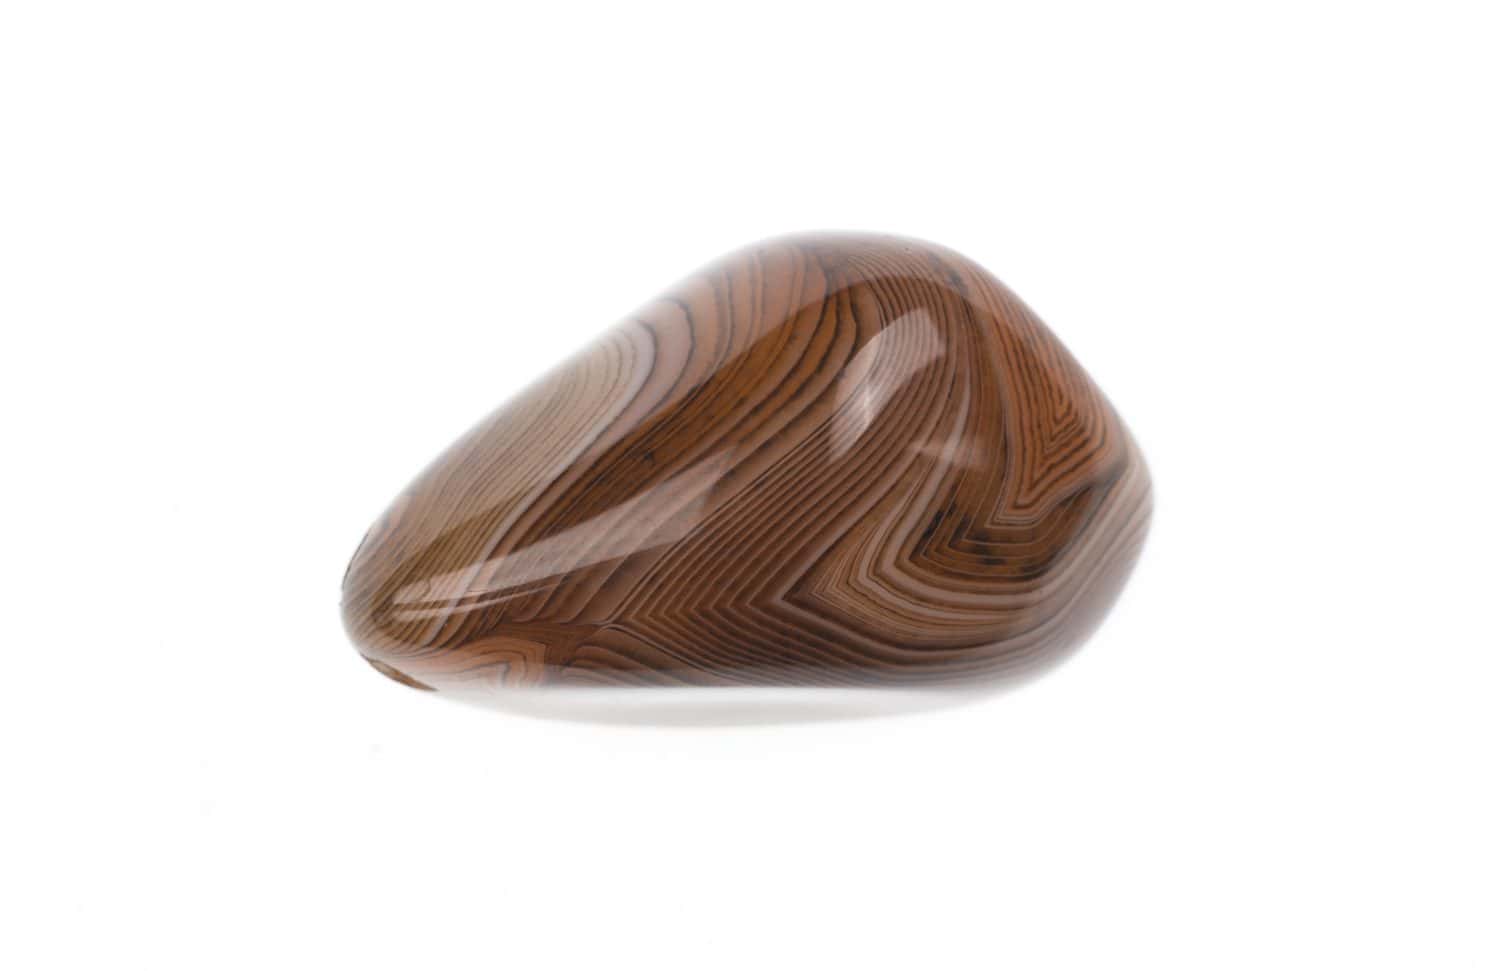 polished brown agate stone isolated on white background